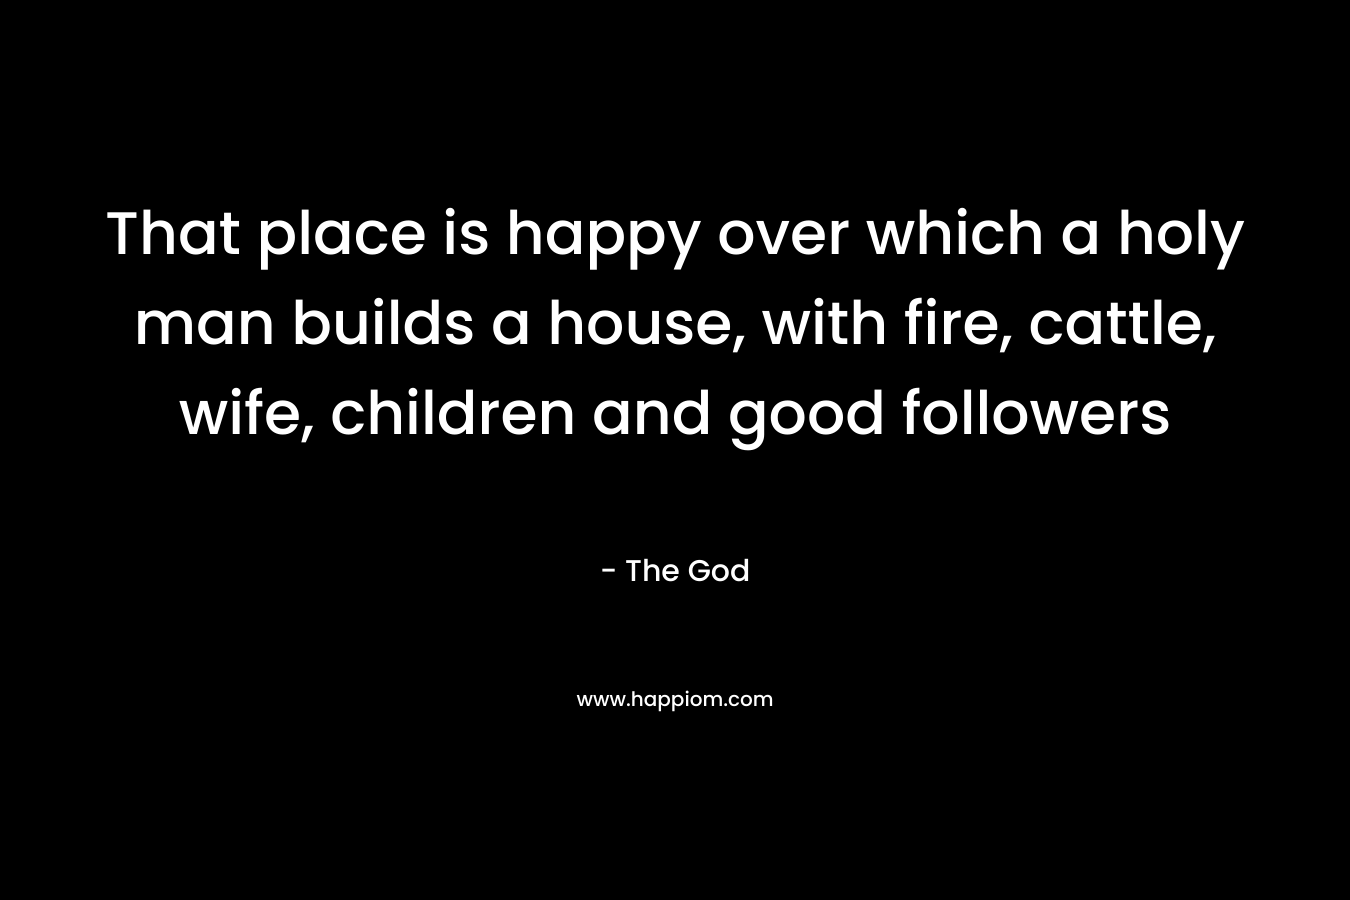 That place is happy over which a holy man builds a house, with fire, cattle, wife, children and good followers – The God